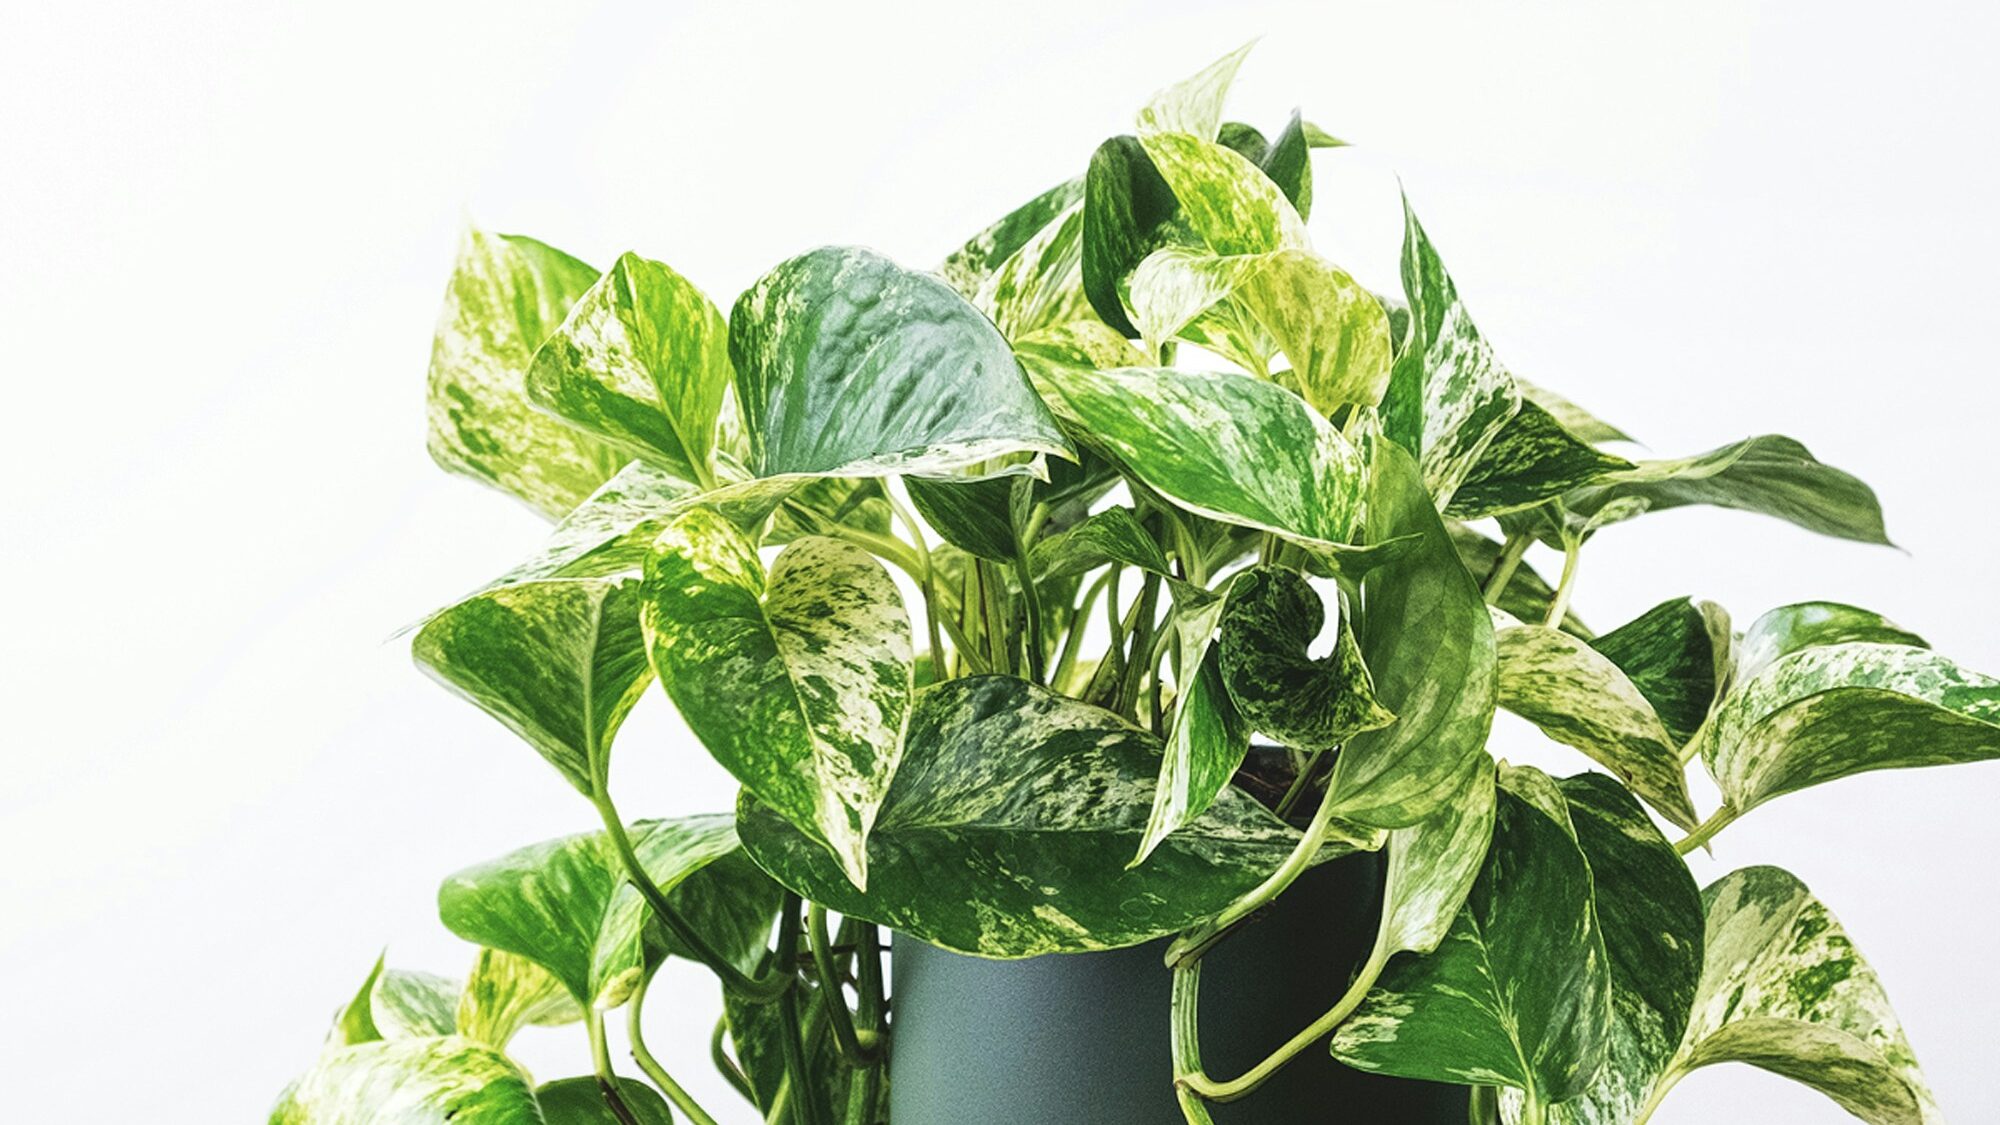 Variegated pothos with green and white leaves in a simple dark pot against a white background.










